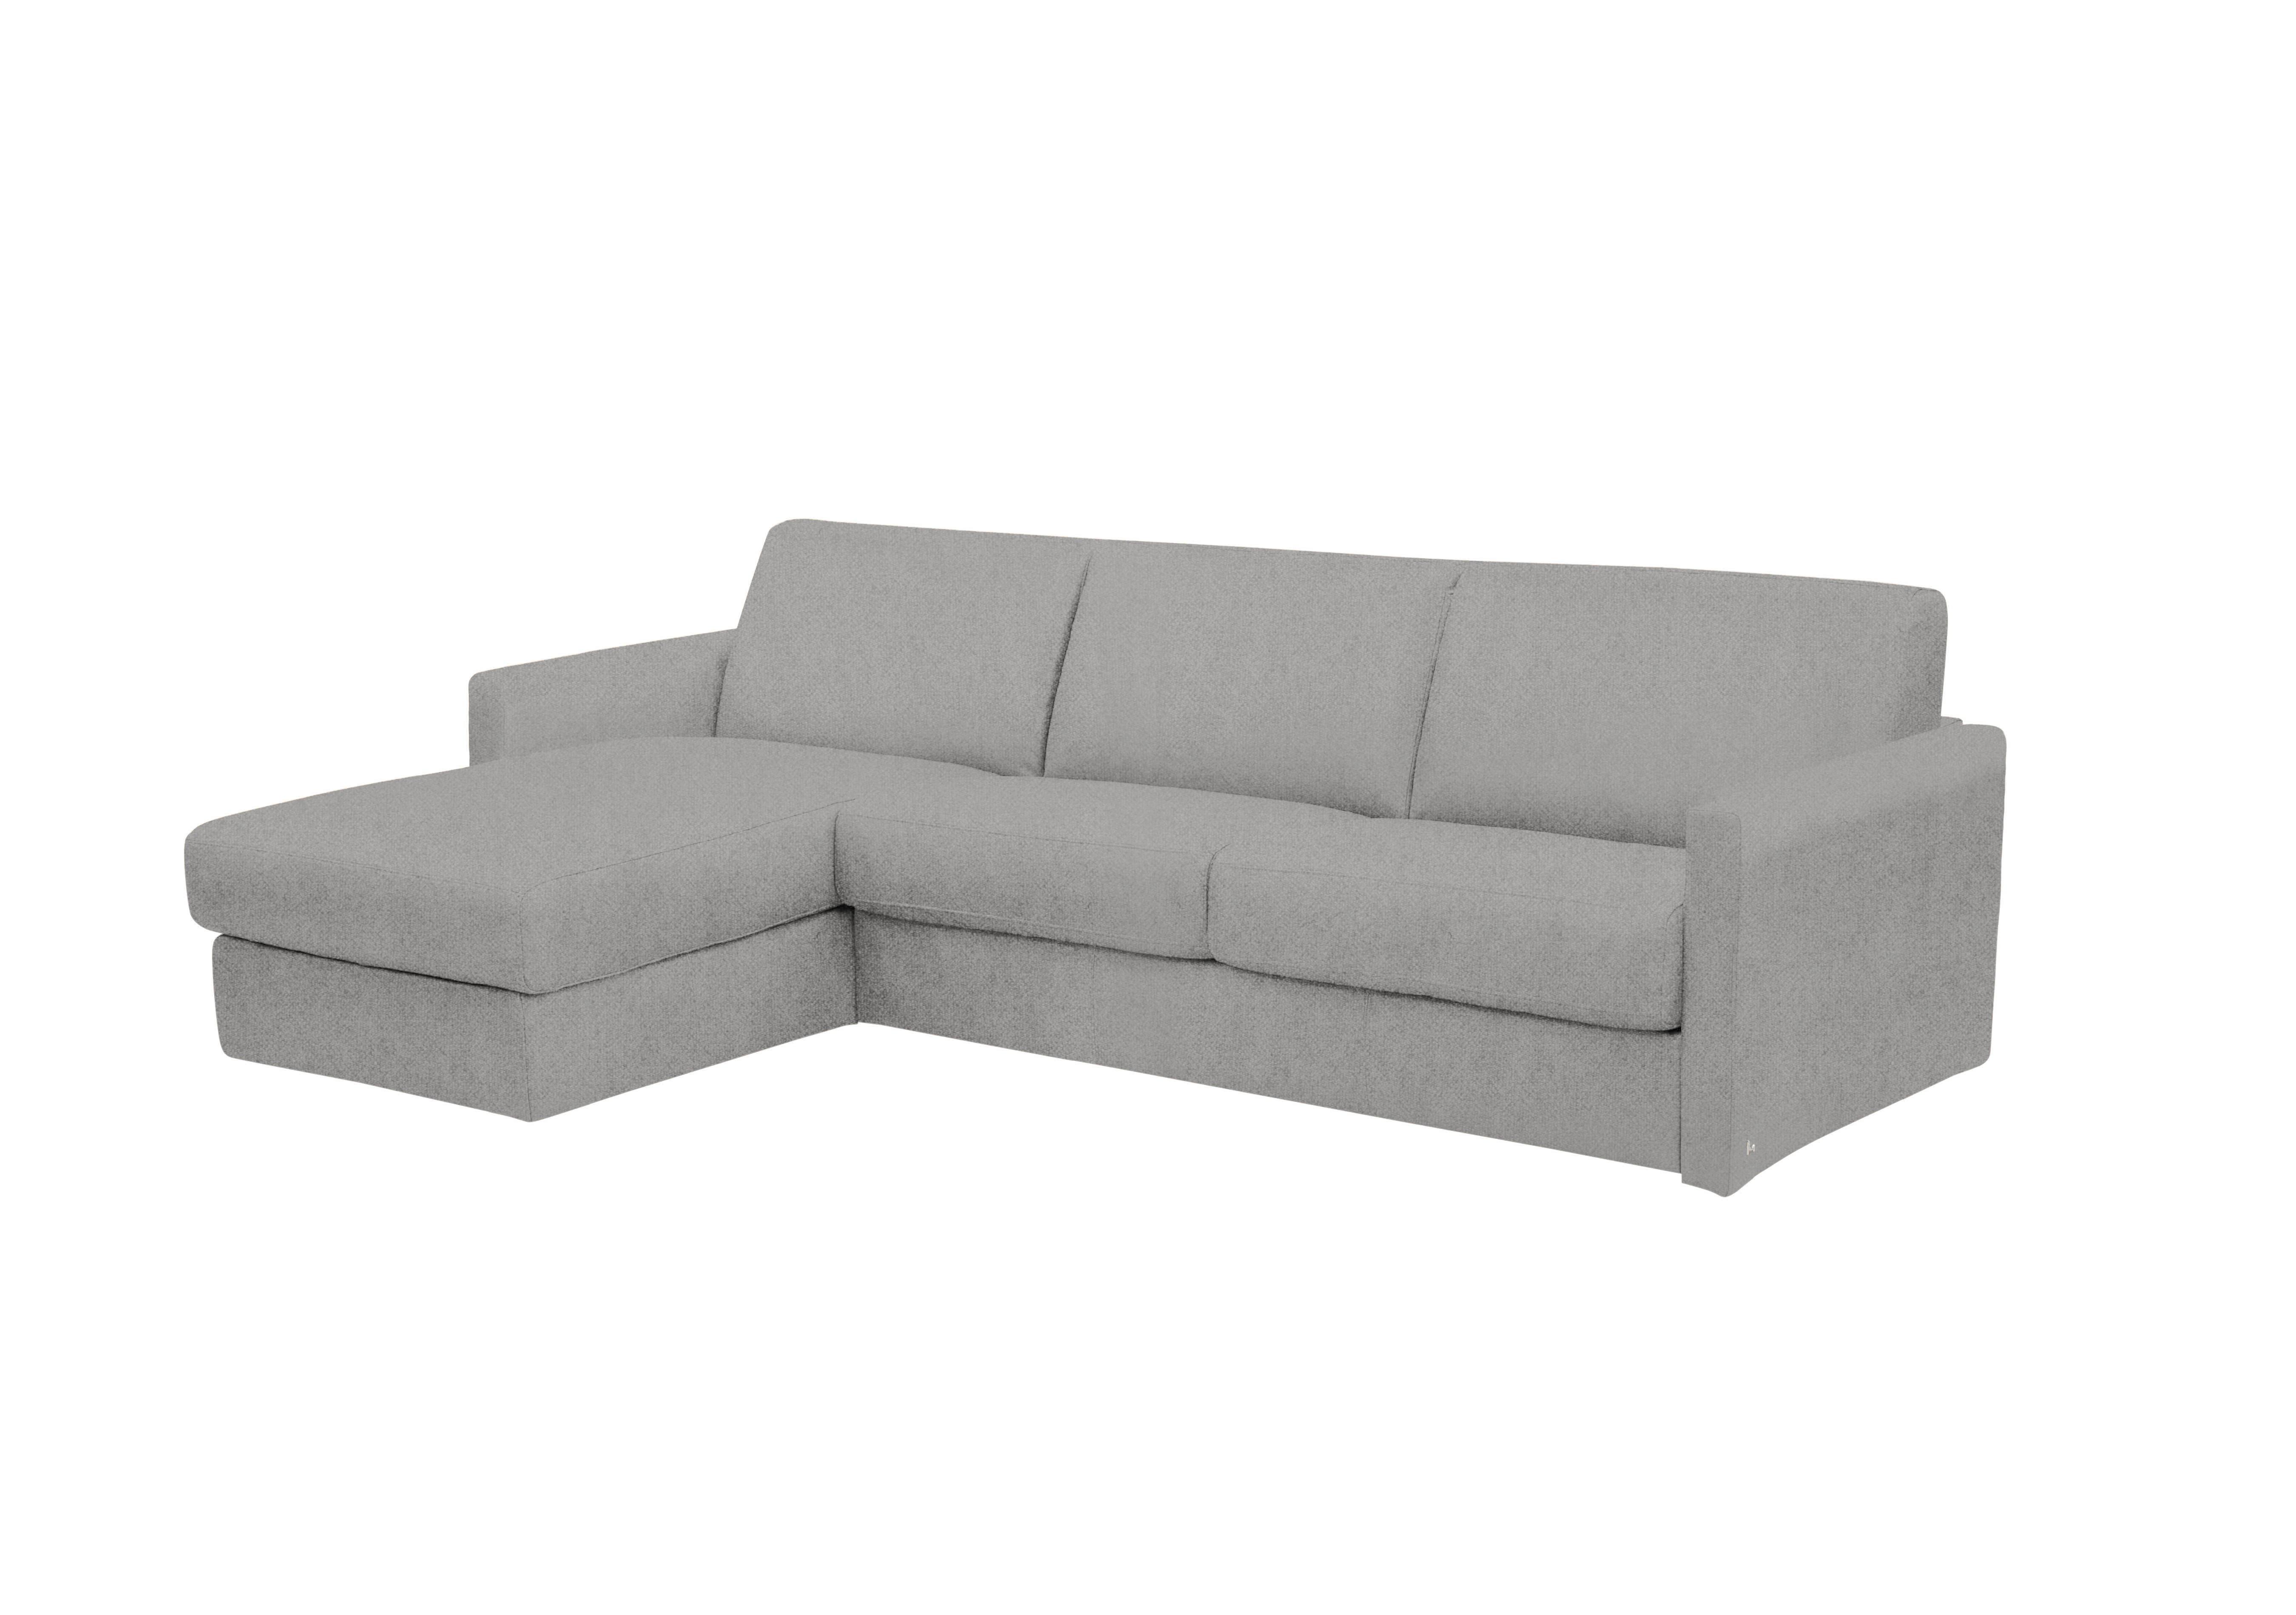 Alcova 3 Seater Fabric Sofa Bed with Storage Chaise with Slim Arms in Fuente Ash on Furniture Village